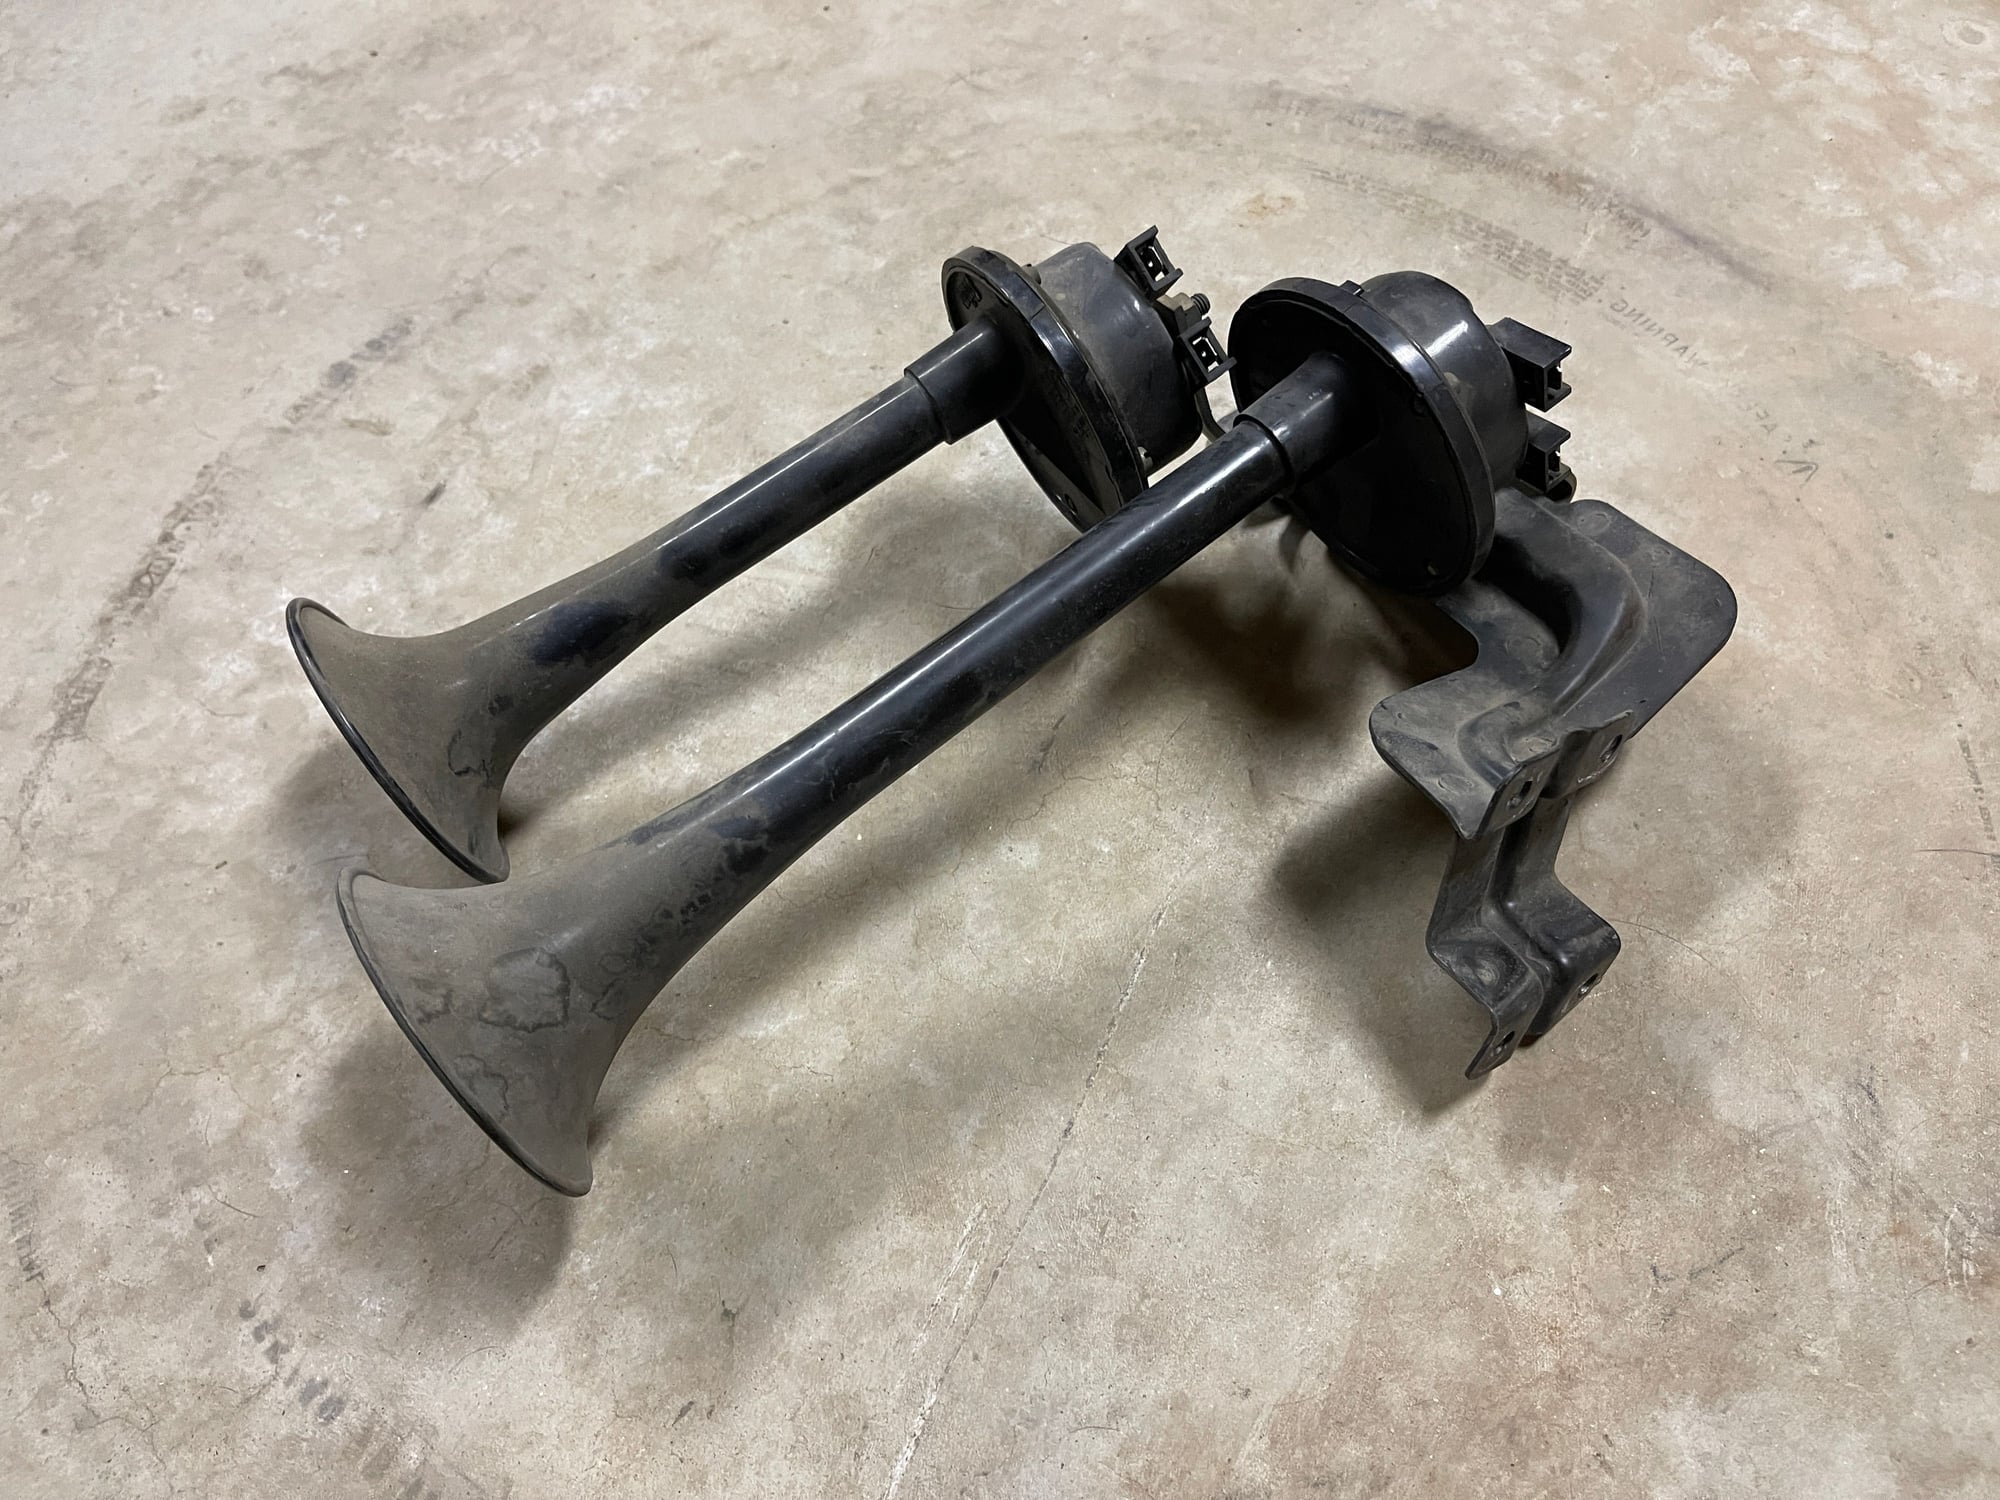 1990 Porsche 911 - Horn Assembly - High and Low Pitched - Miscellaneous - $100 - Loveland, CO 80537, United States